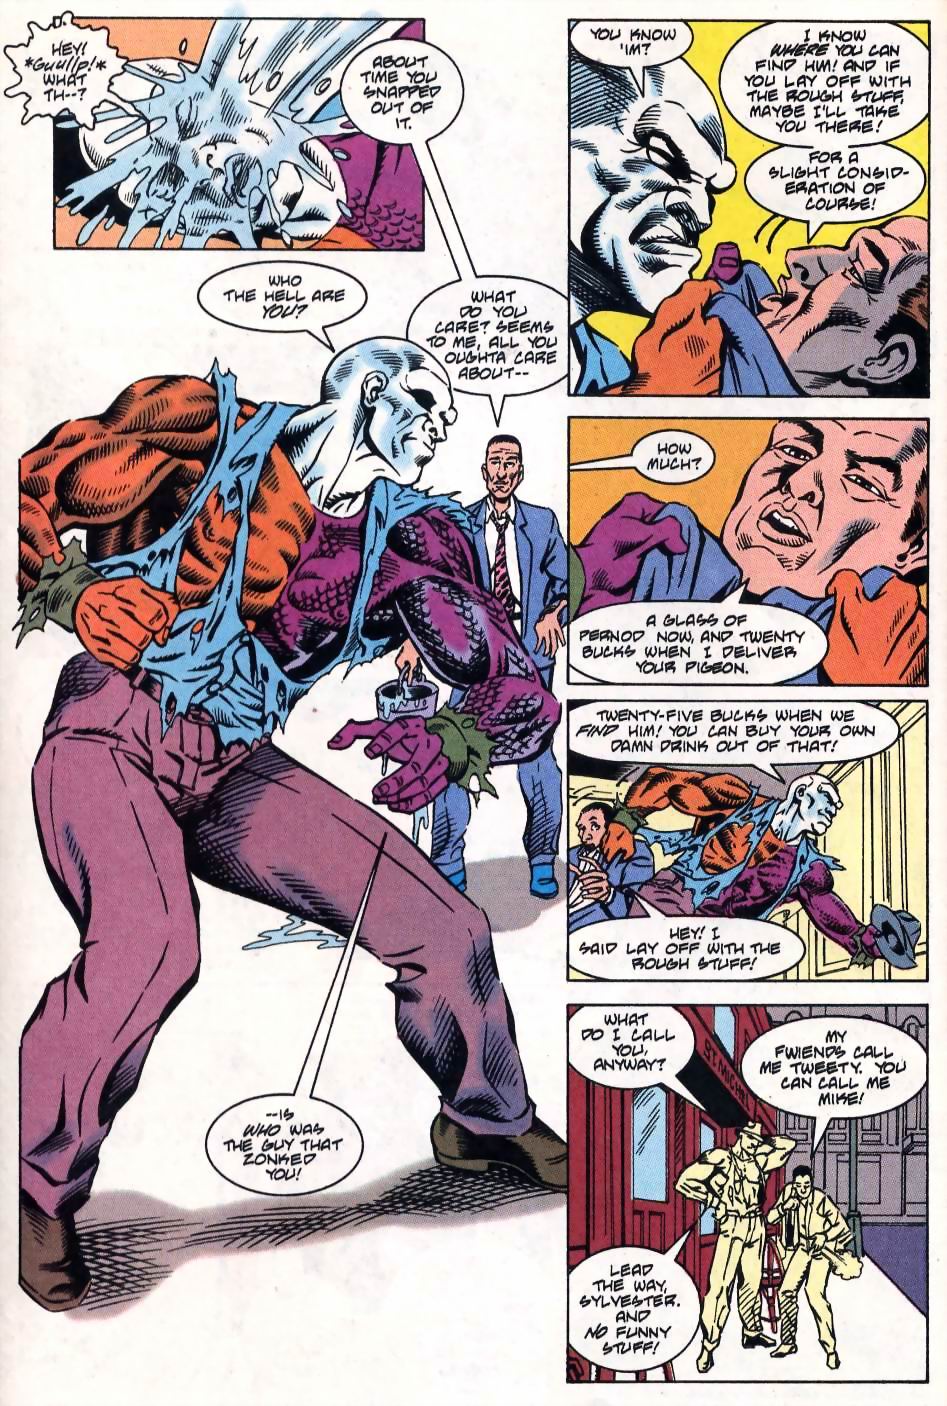 Justice League International (1993) 53 Page 6